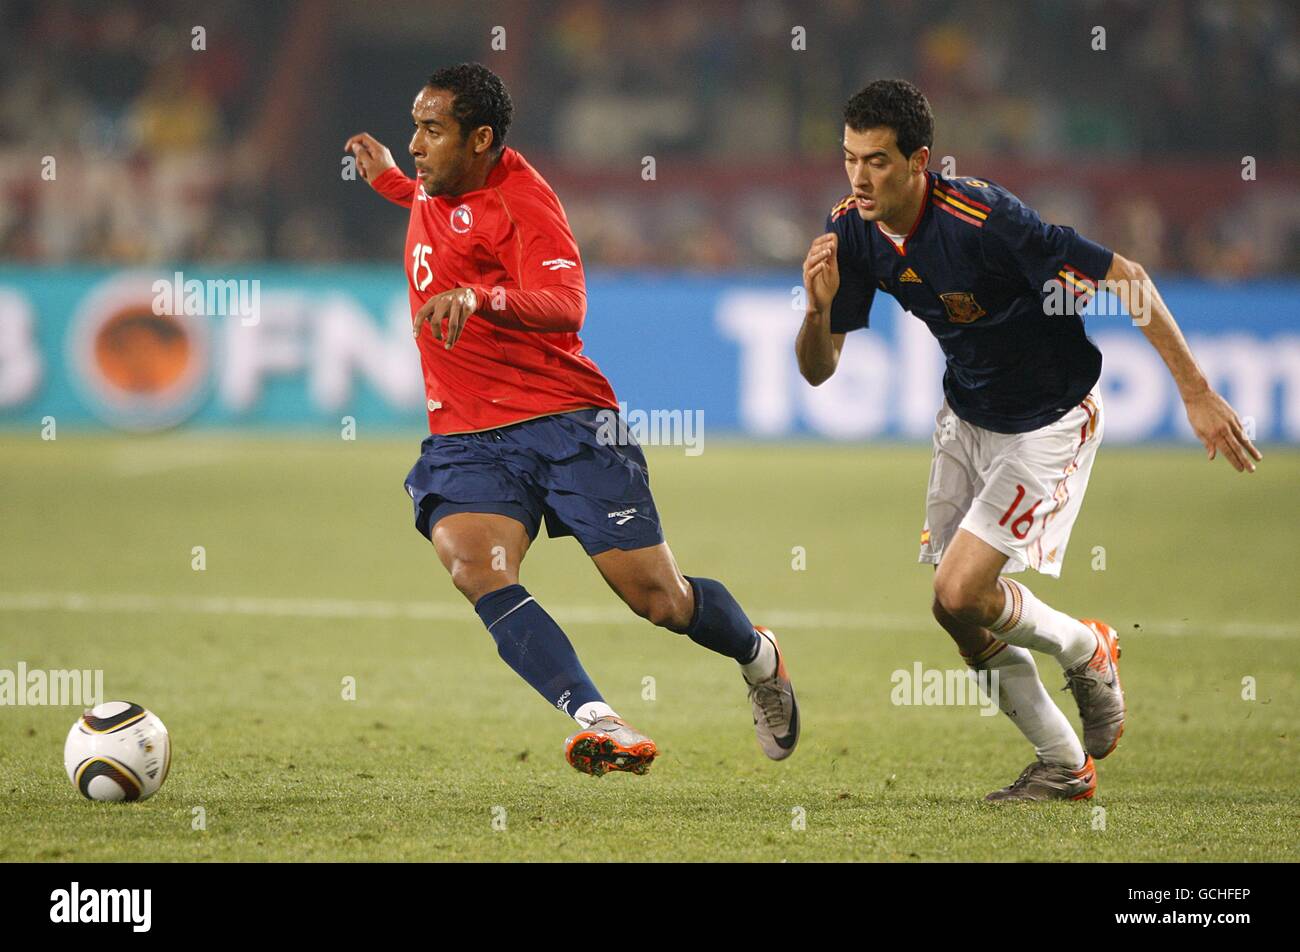 Spain's Sergio Busquets (right) and Chile's Jean Beausejour (left) battle for the ball Stock Photo